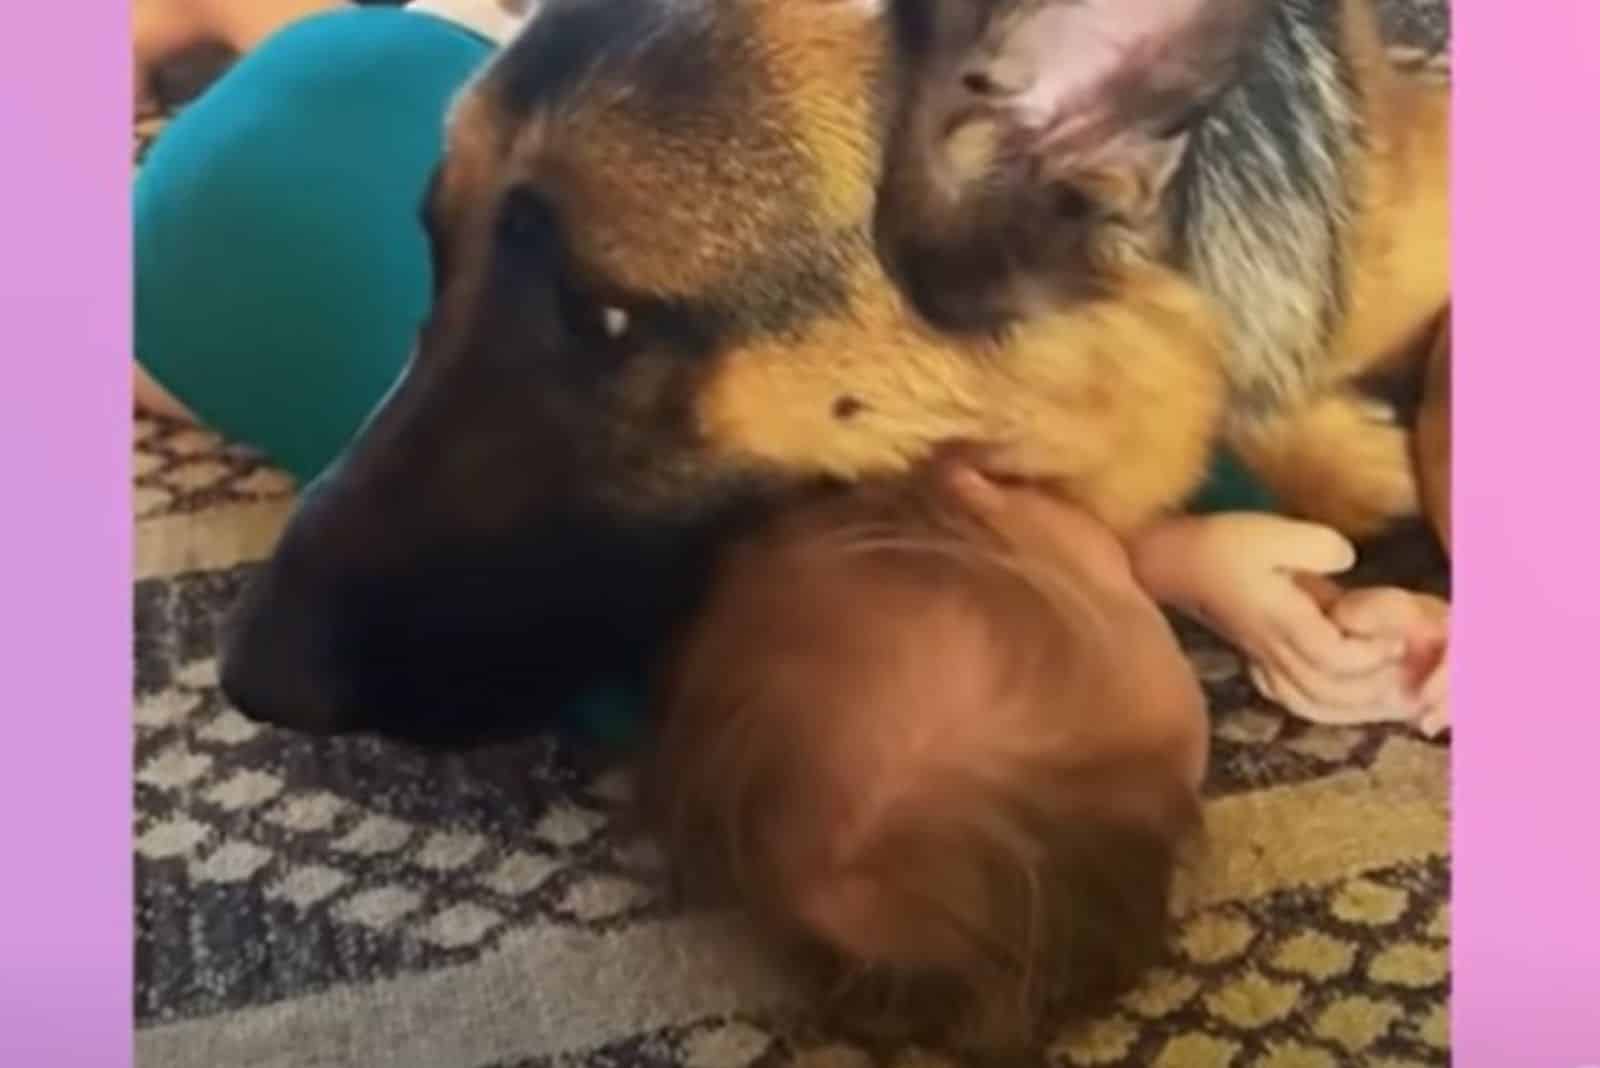 german shepherd dog playing with little girl on the carpet